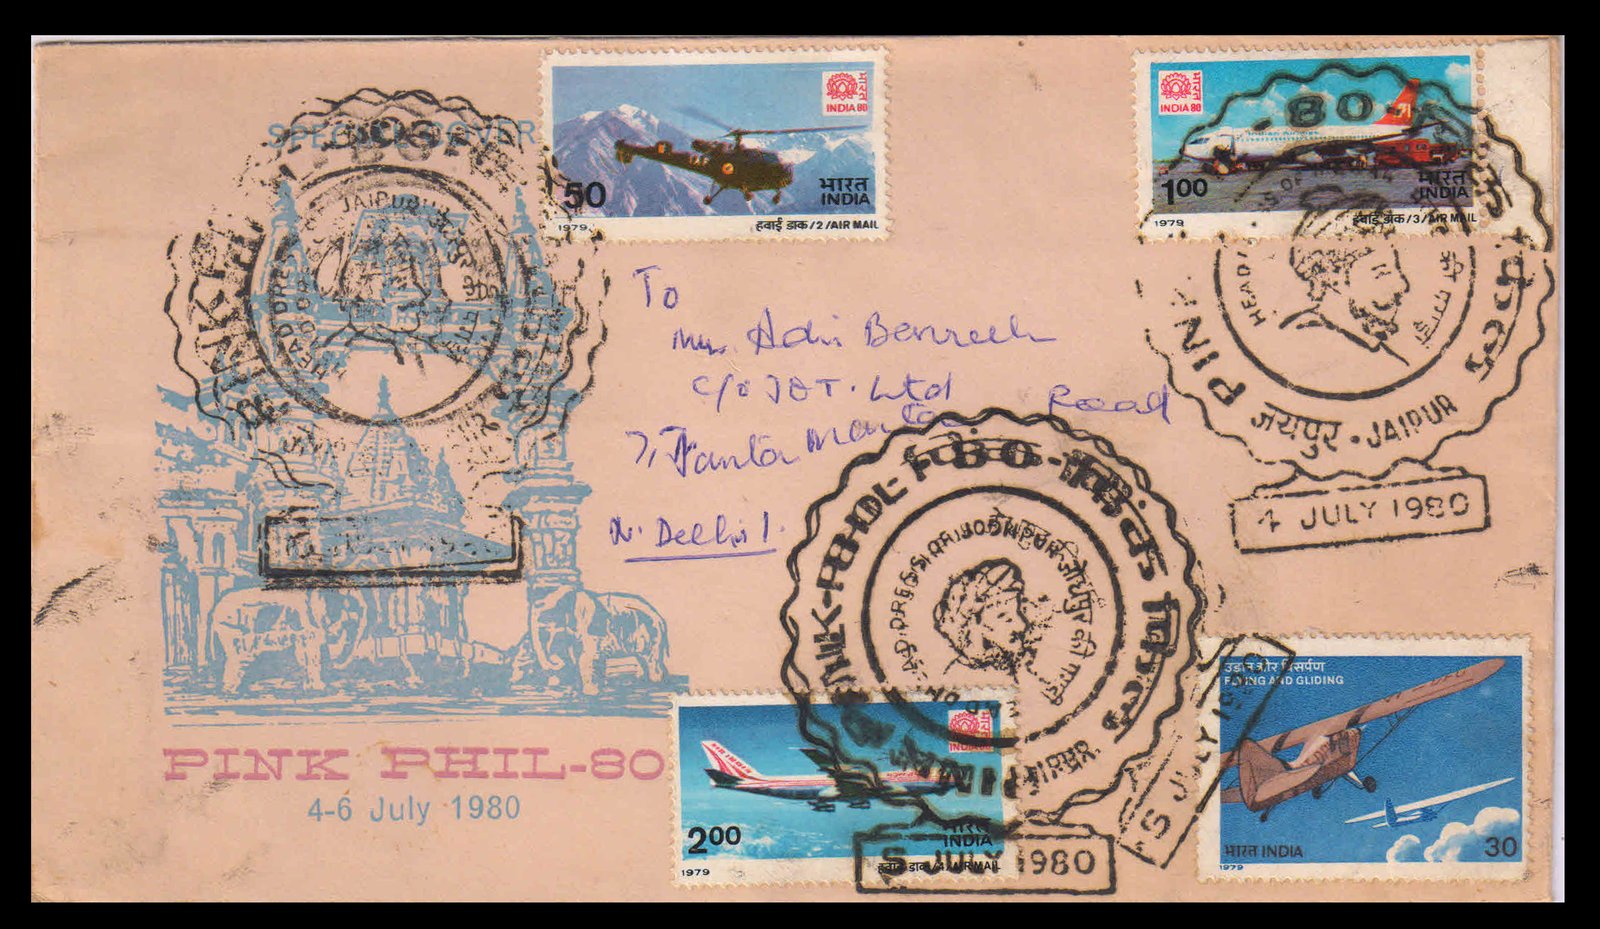 INDIA STAMP Exhibition Cover. 4-6 July 1980. PINK PHIL. 3 Days Cancellation on Cover as per scan